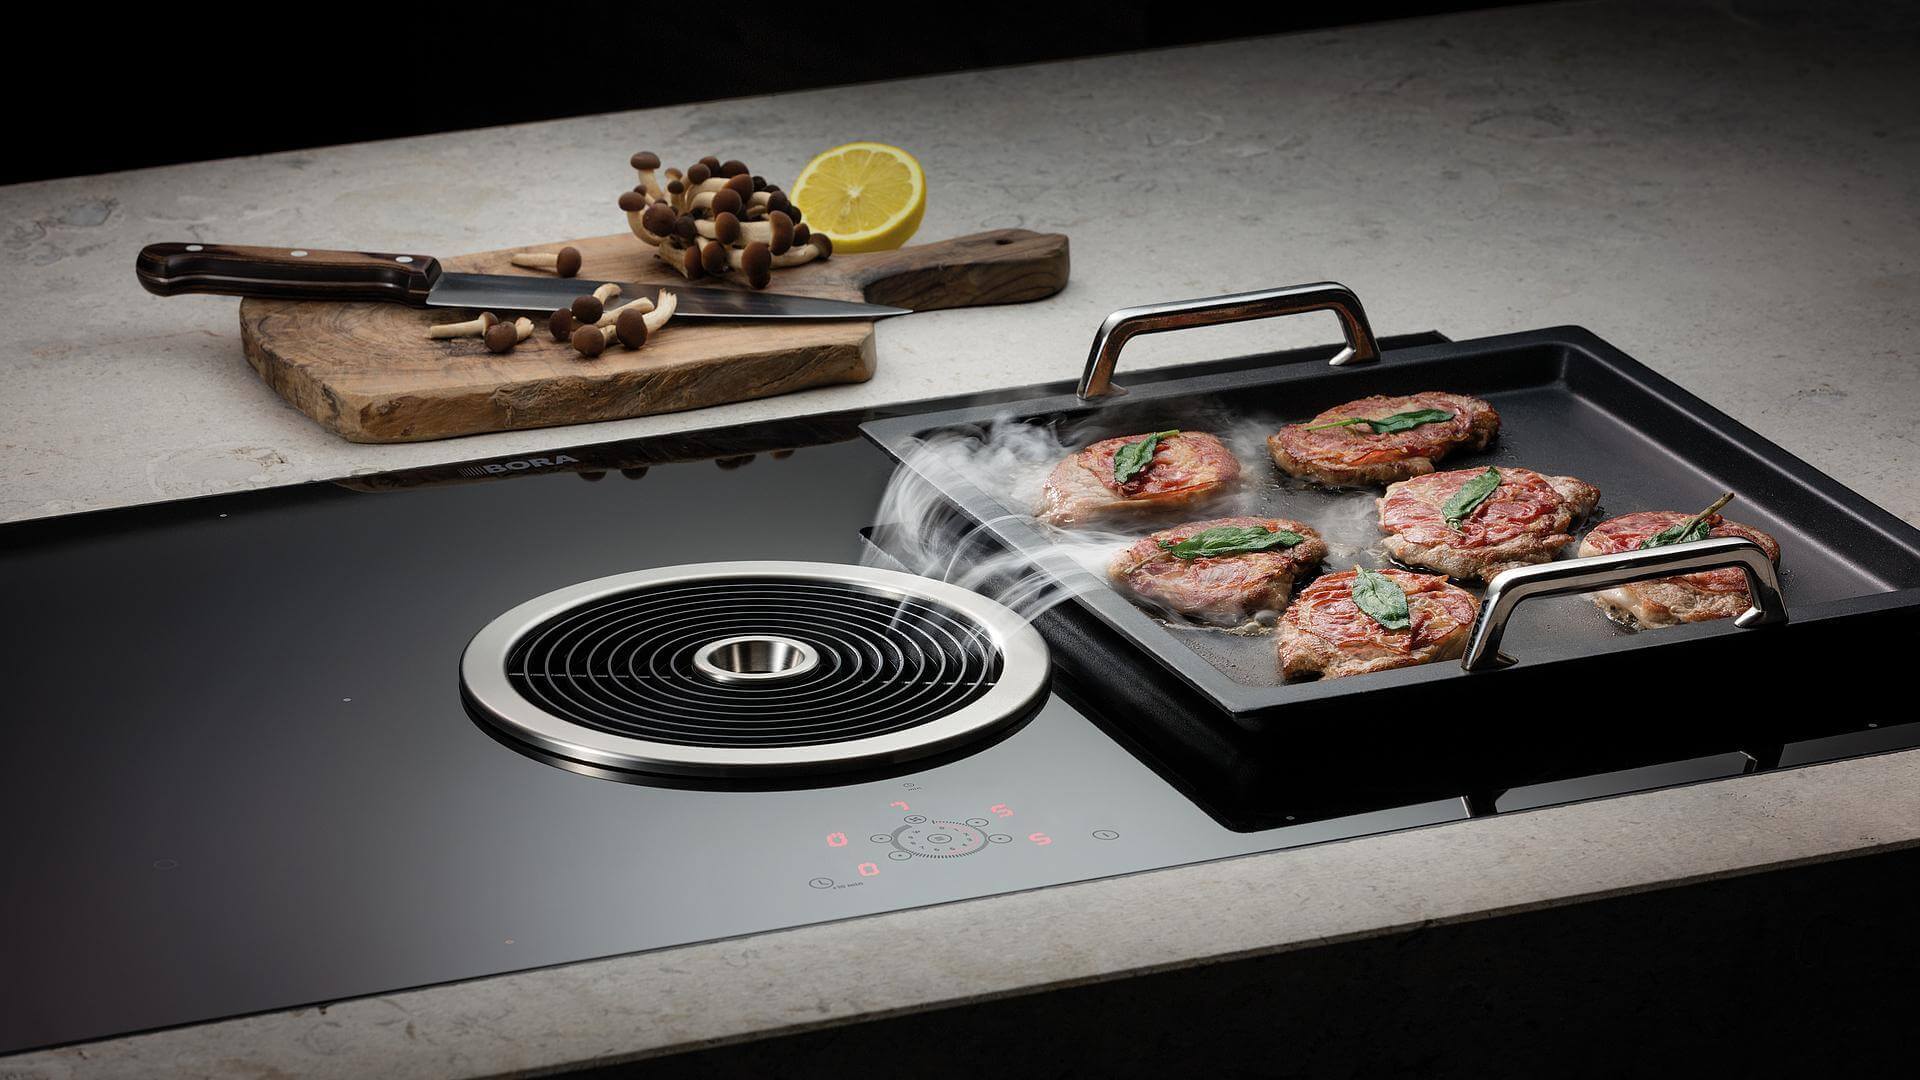 Bora Induction hob and Extrator